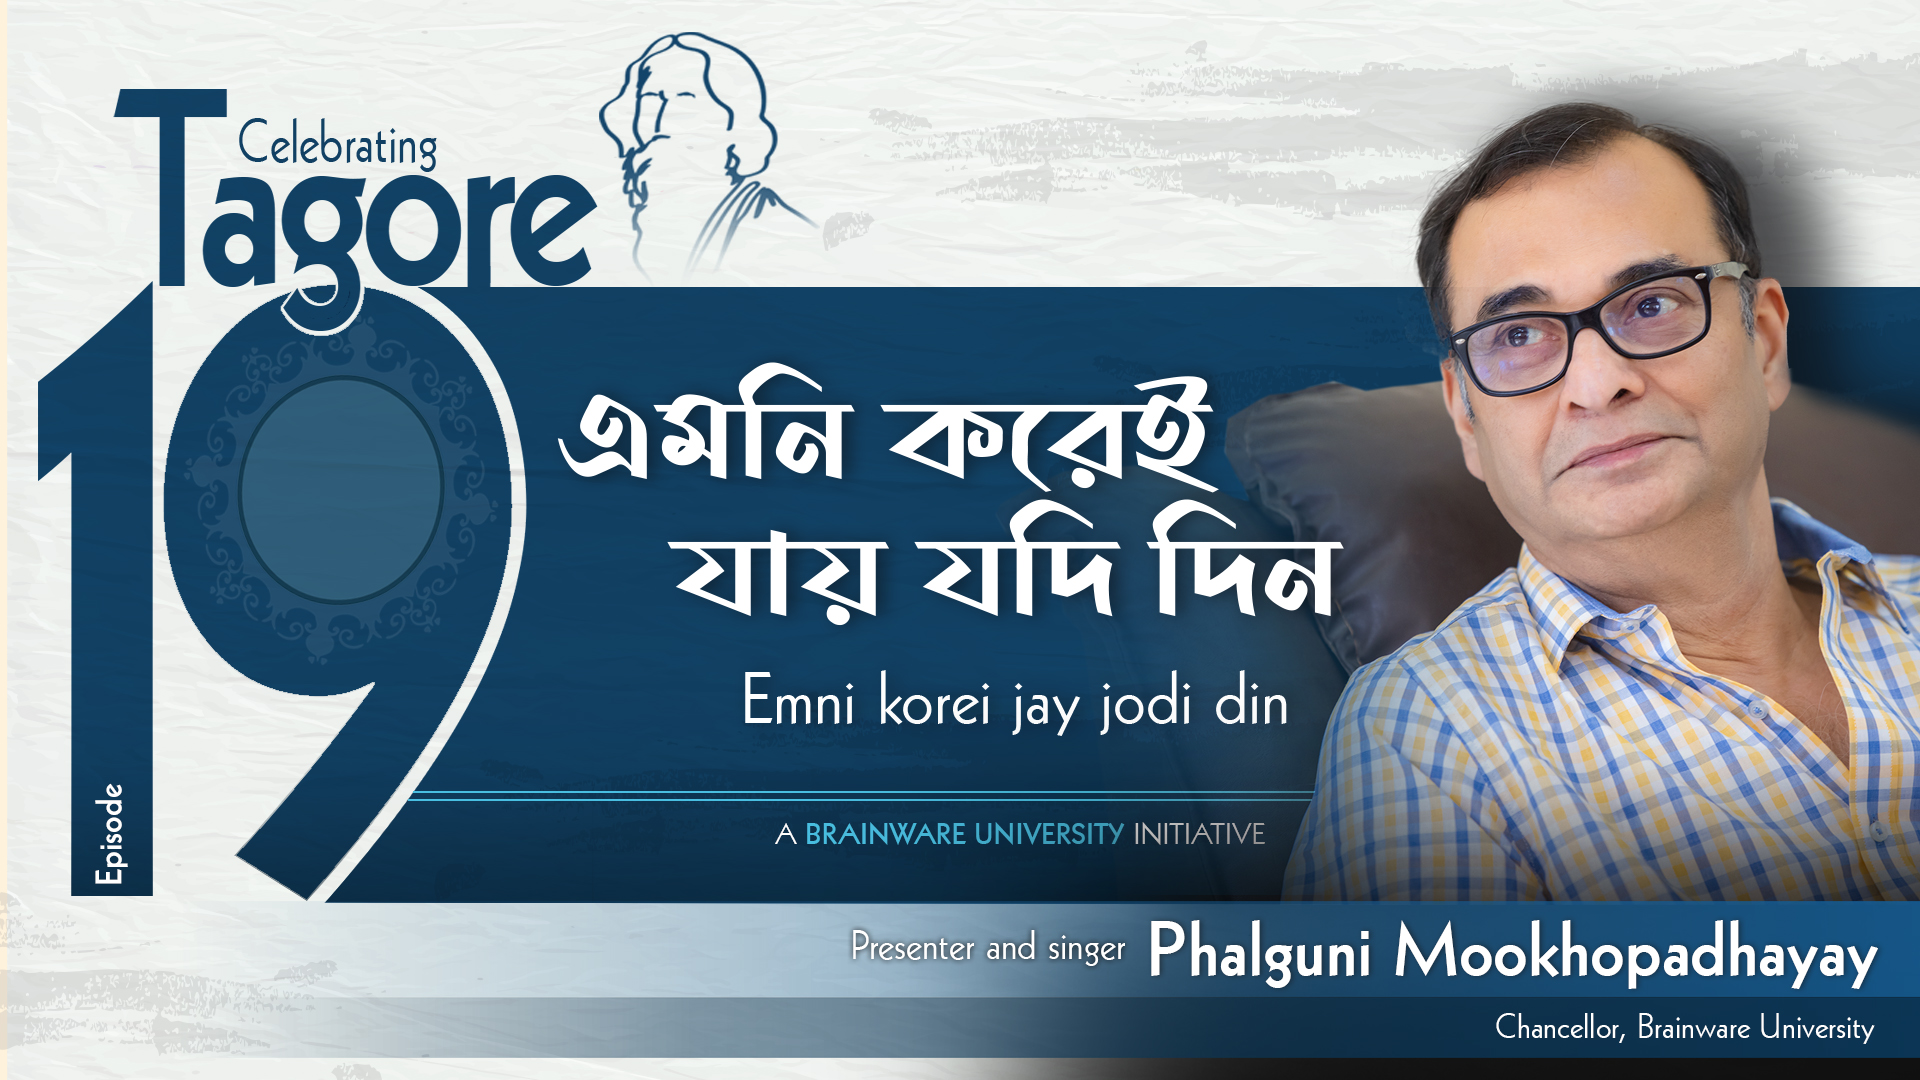 Promotional poster for the 19th episode of "Celebrating Tagore," a Brainware University initiative. The episode is titled "Emni Korei Jay Jodi Din," featuring Rabindra Sangeet. Phalguni Mookhopadhayay, the Chancellor of Brainware University, is the presenter and singer for this episode. The poster includes an image of Phalguni Mookhopadhayay and a silhouette of Rabindranath Tagore, emphasizing the cultural celebration of Tagore's music.